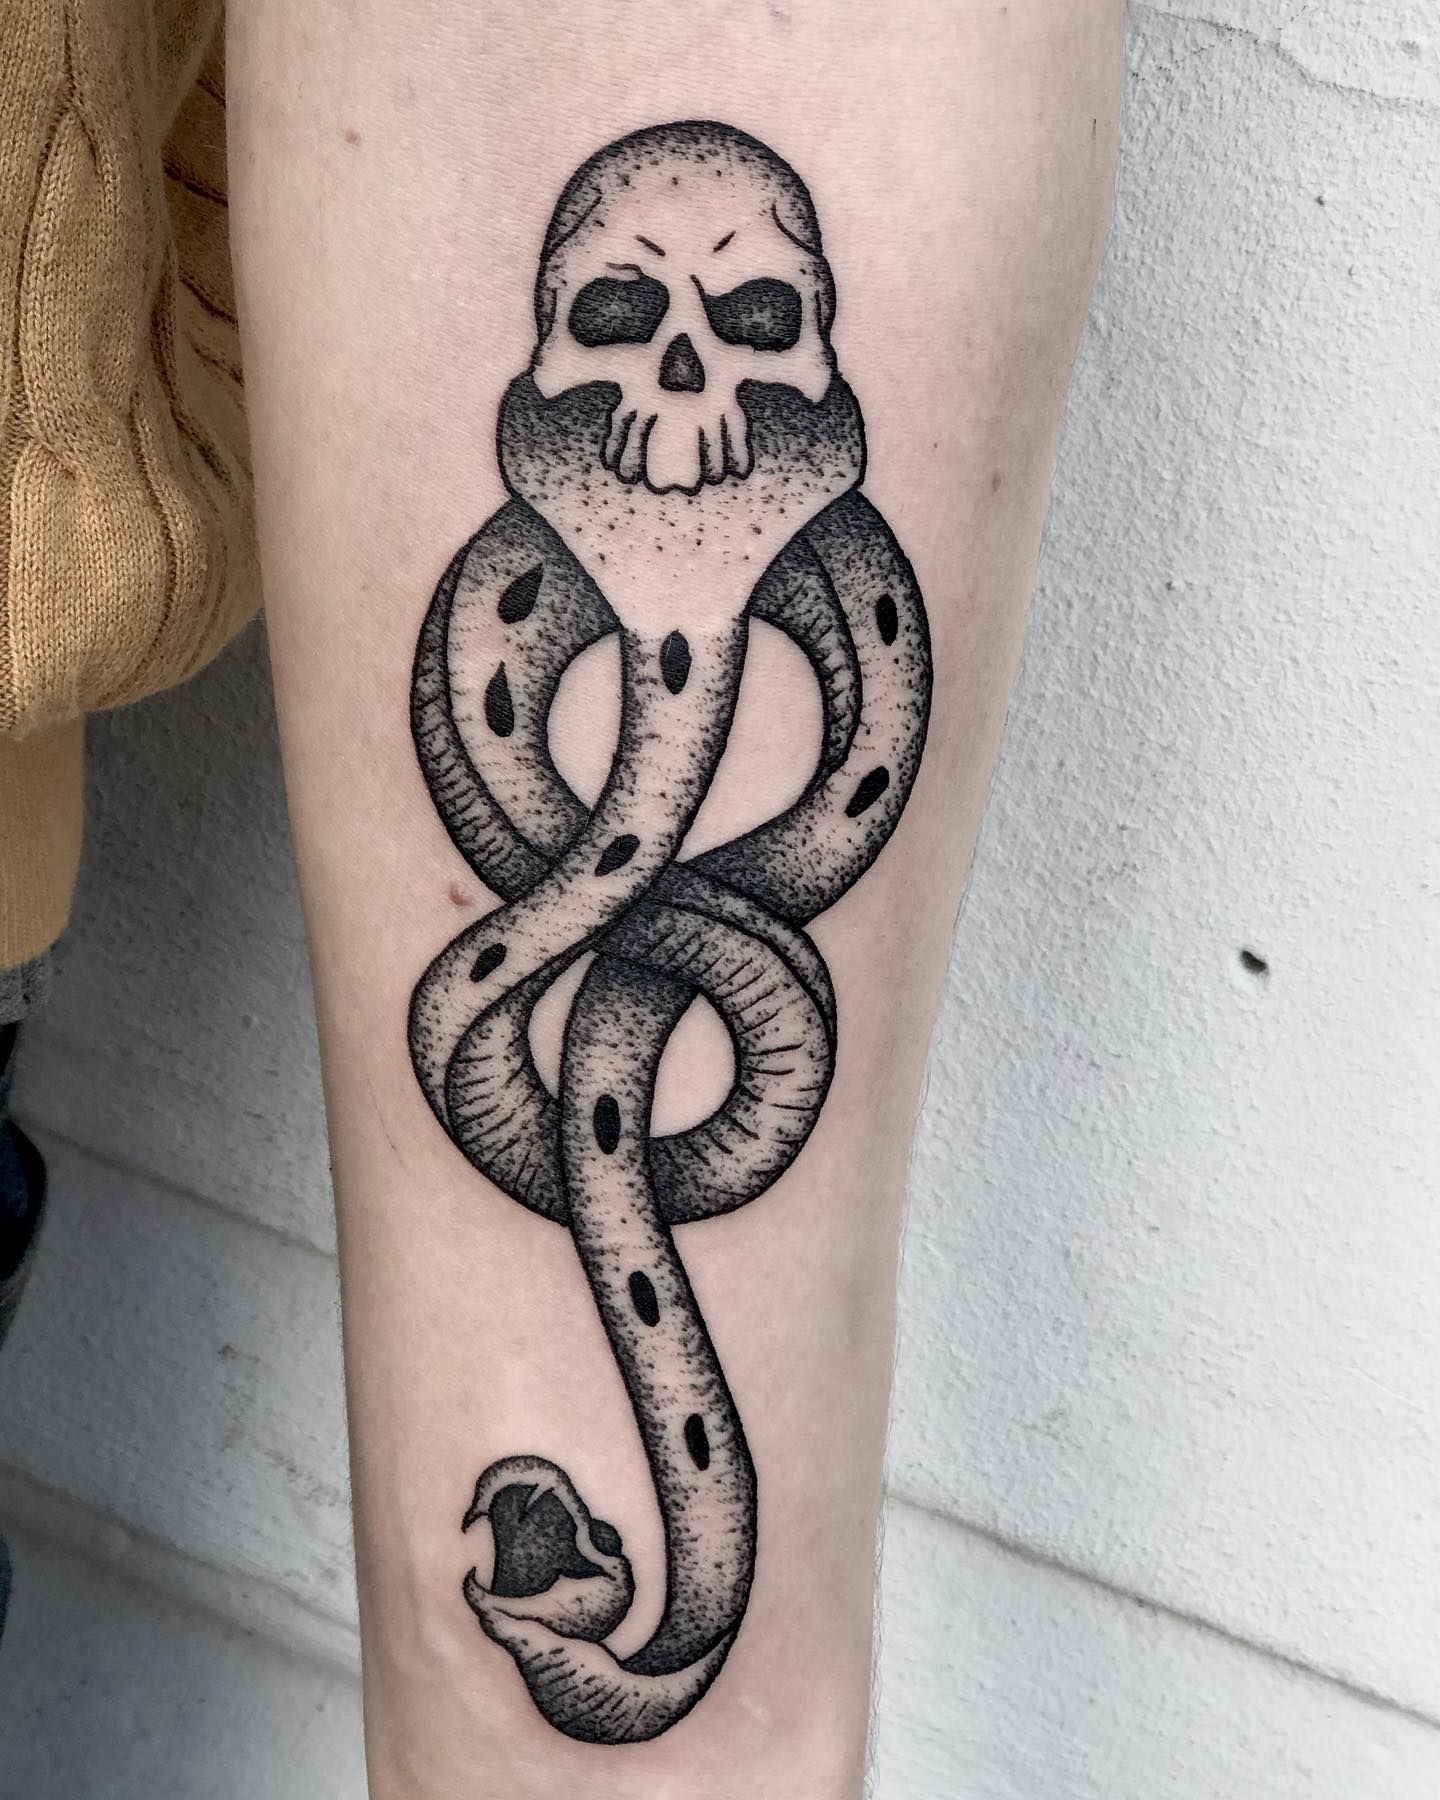 In this death eater tattoo, dotwork technique which is about filling dots to give a shading effect. This tattoo is usually used to symbolize the dark side of magic, or the fact that someone has been touched by Voldemort's powers.